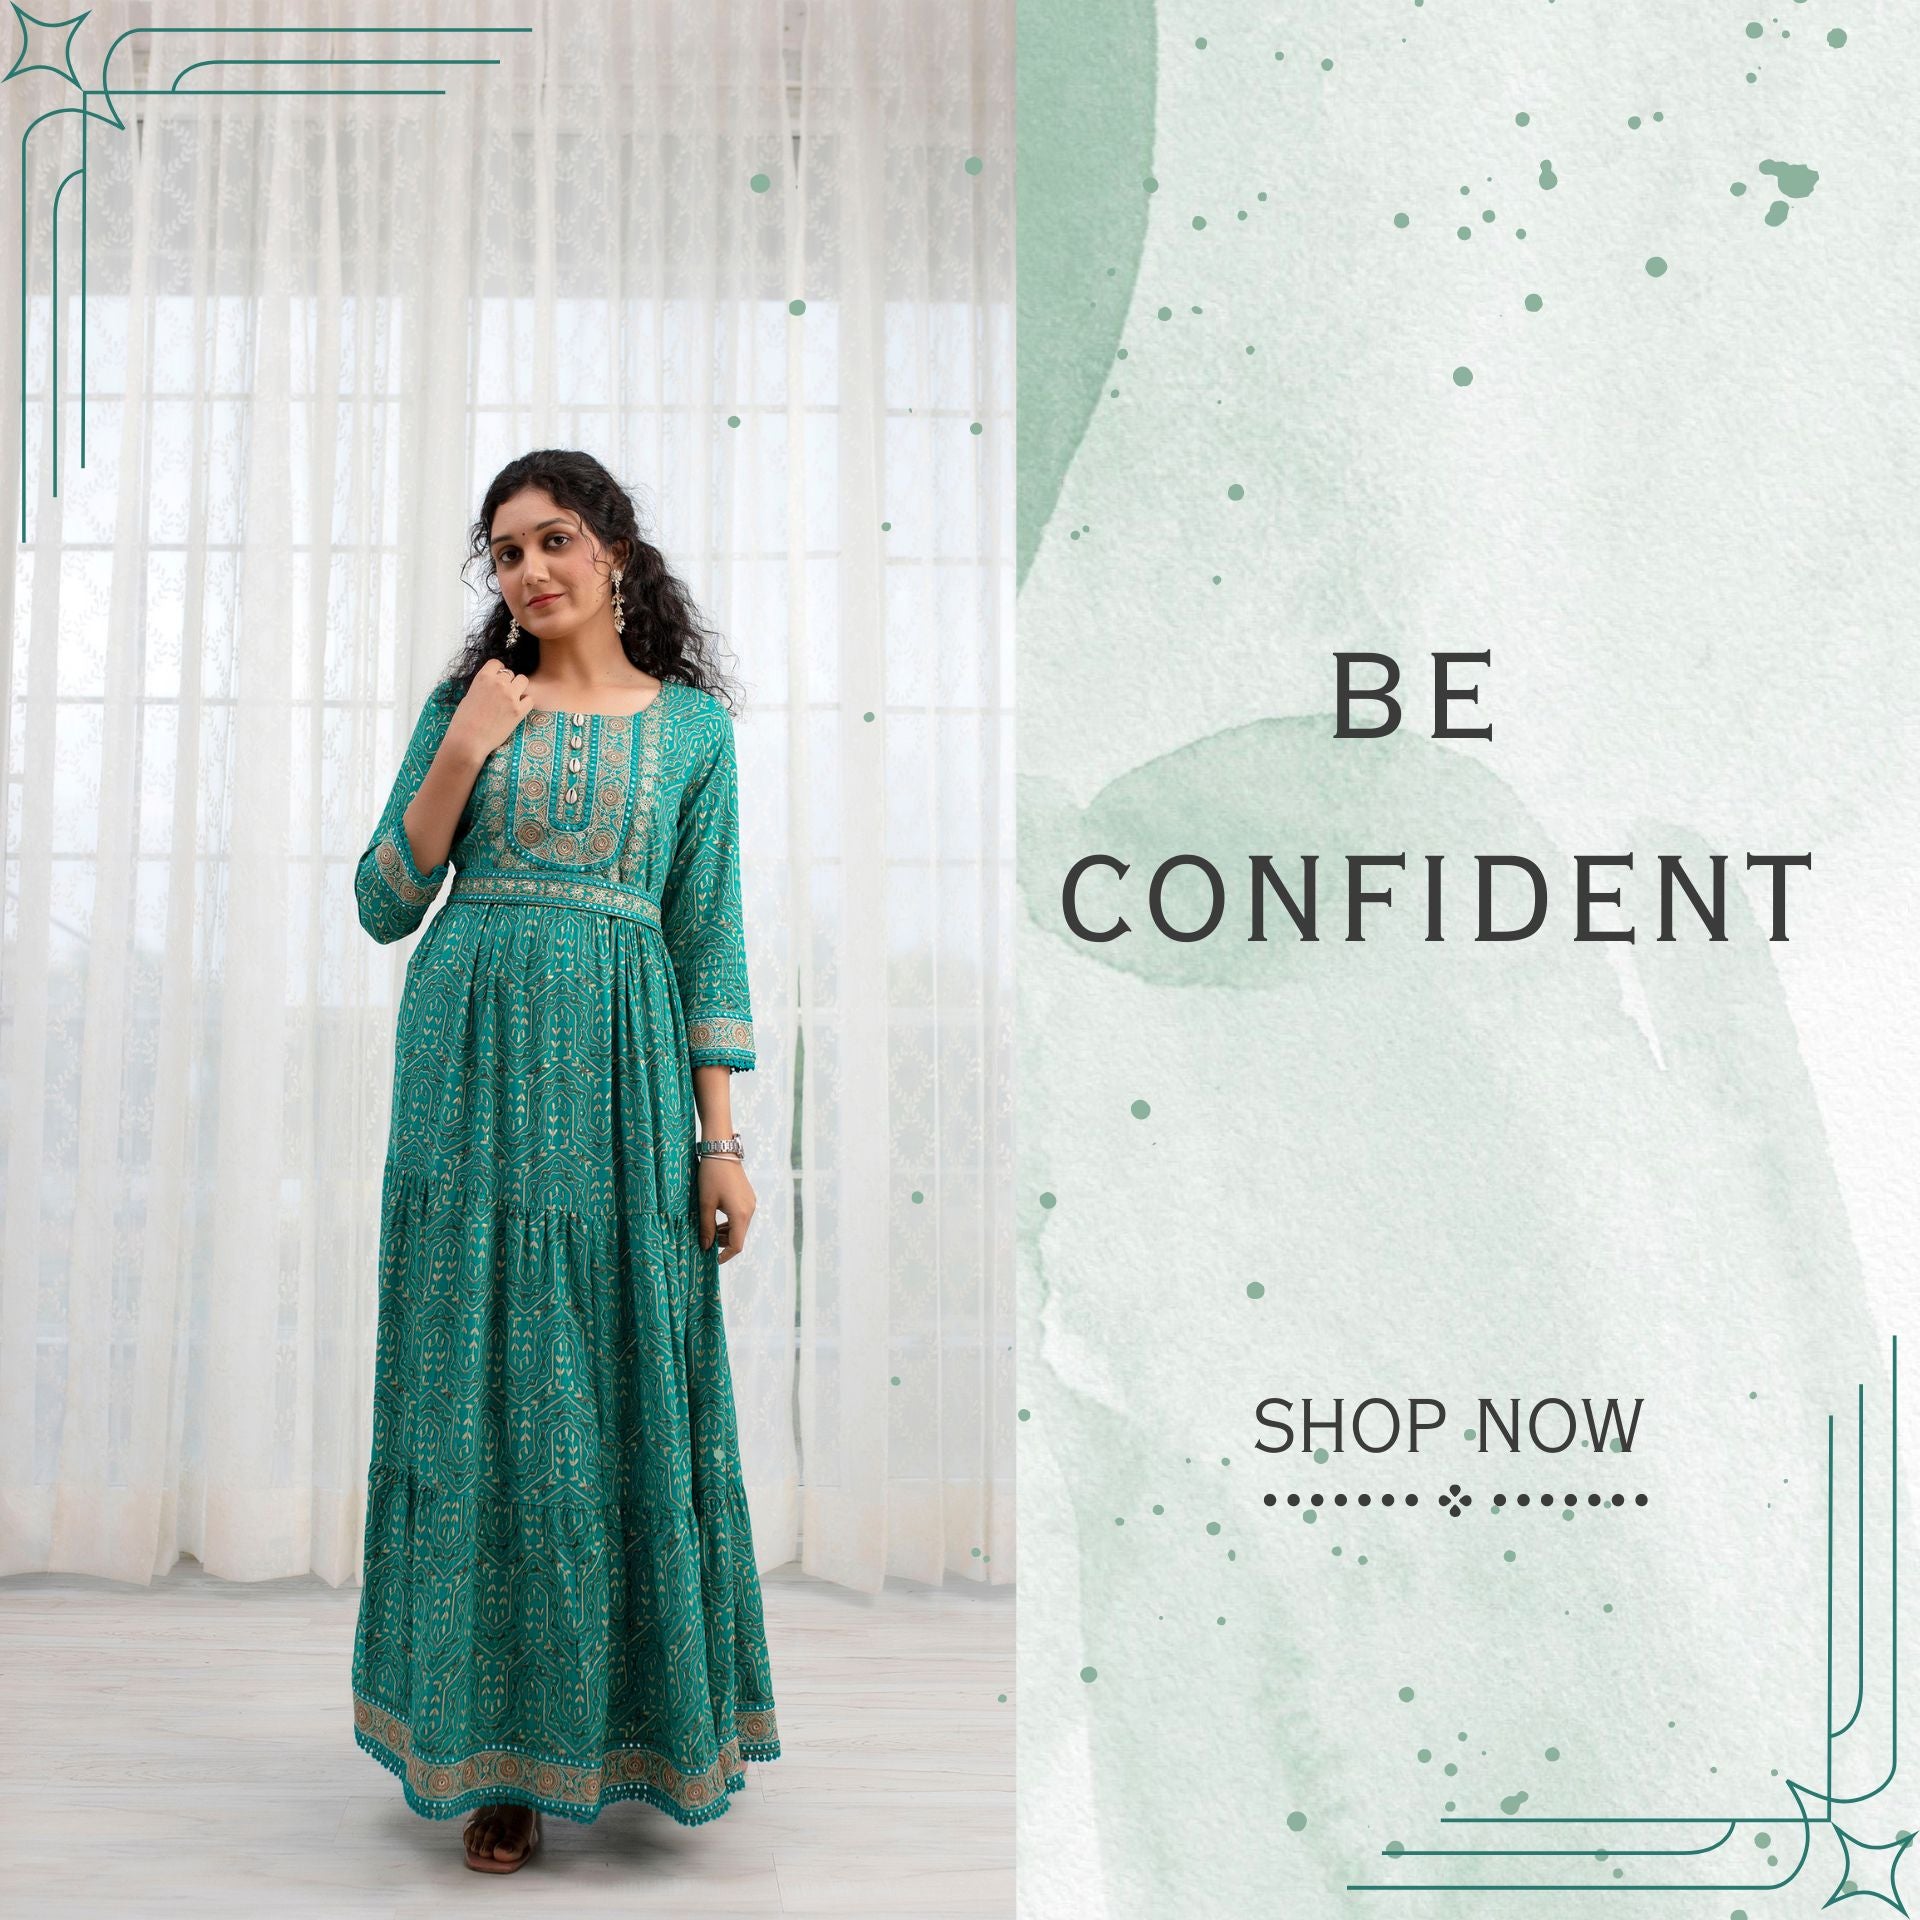 Heavy party wear ethnic gowns for women at lowest price online. Buy latest ethnic  dresses at best prices on Udaipur Bazar. - Shop online women fashion,  indo-western, ethnic wear, sari, suits, kurtis,